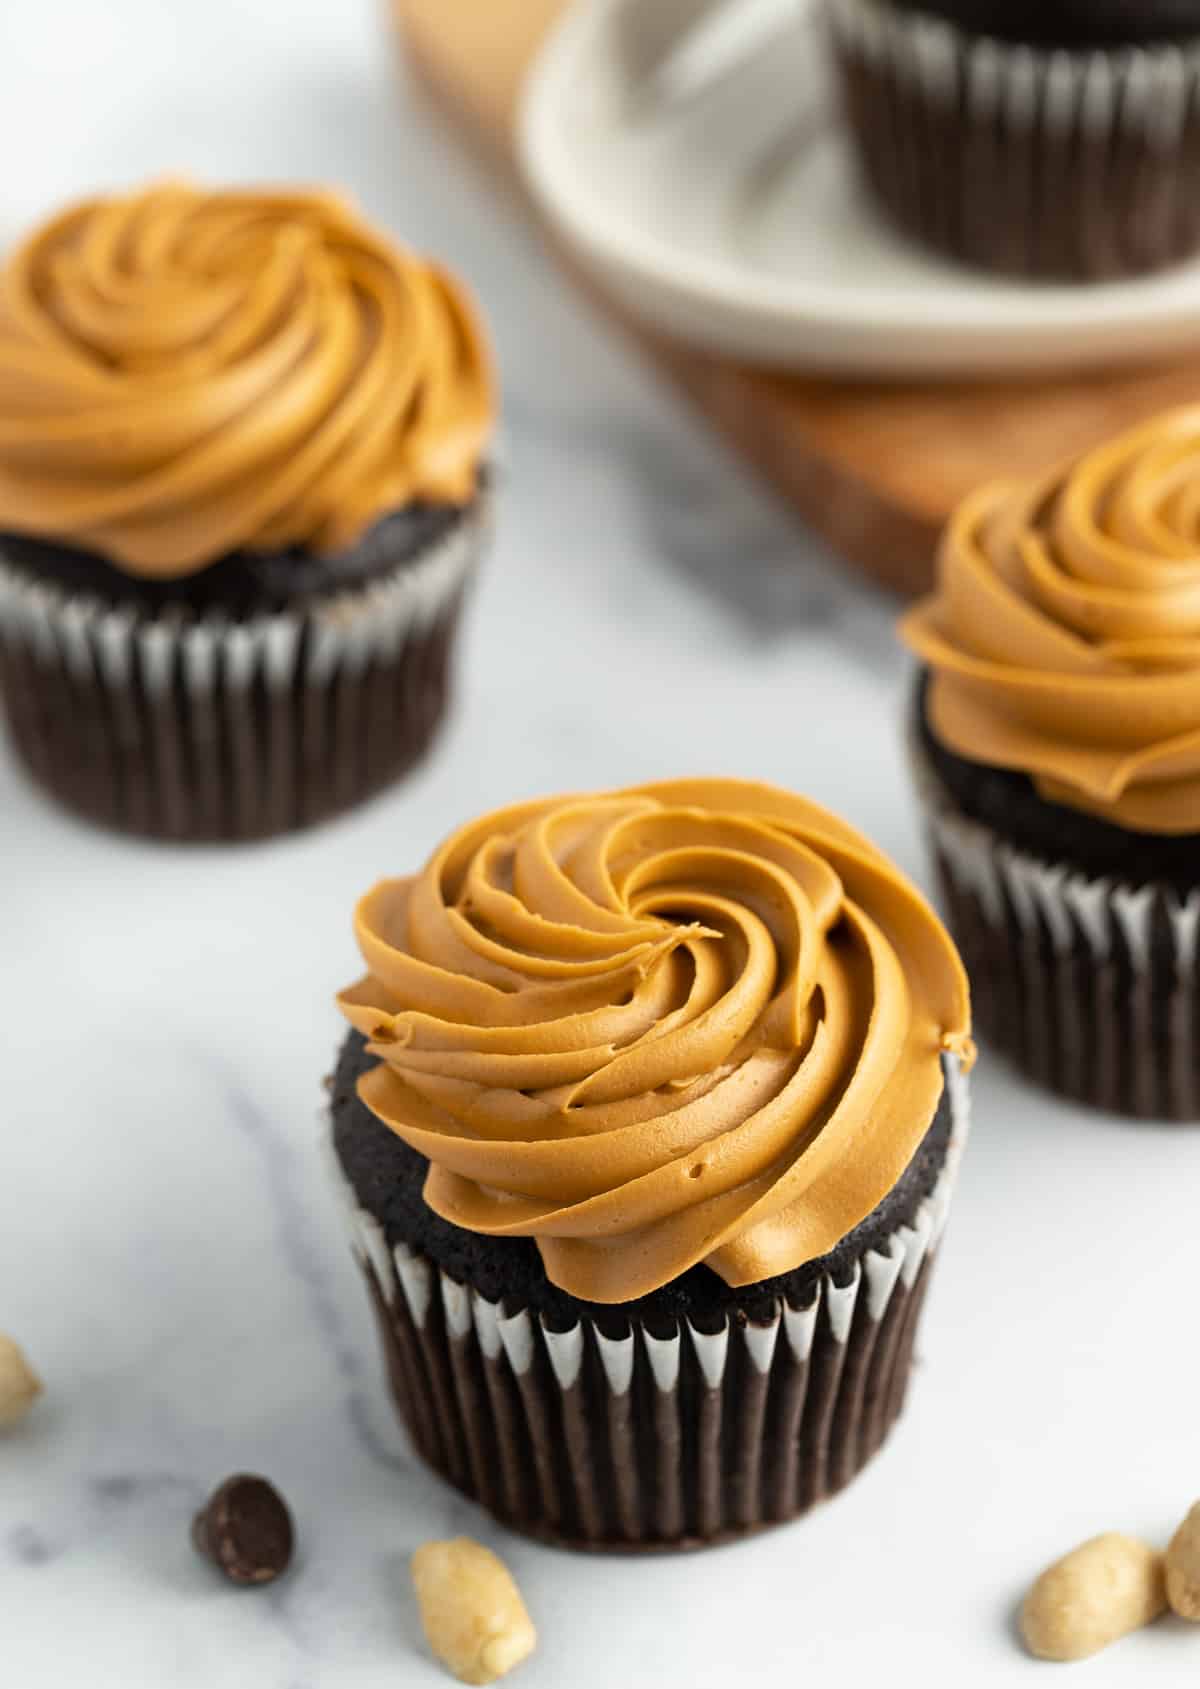 4 chocolate cupcakes with peanut butter cream cheese frosting on a white board.